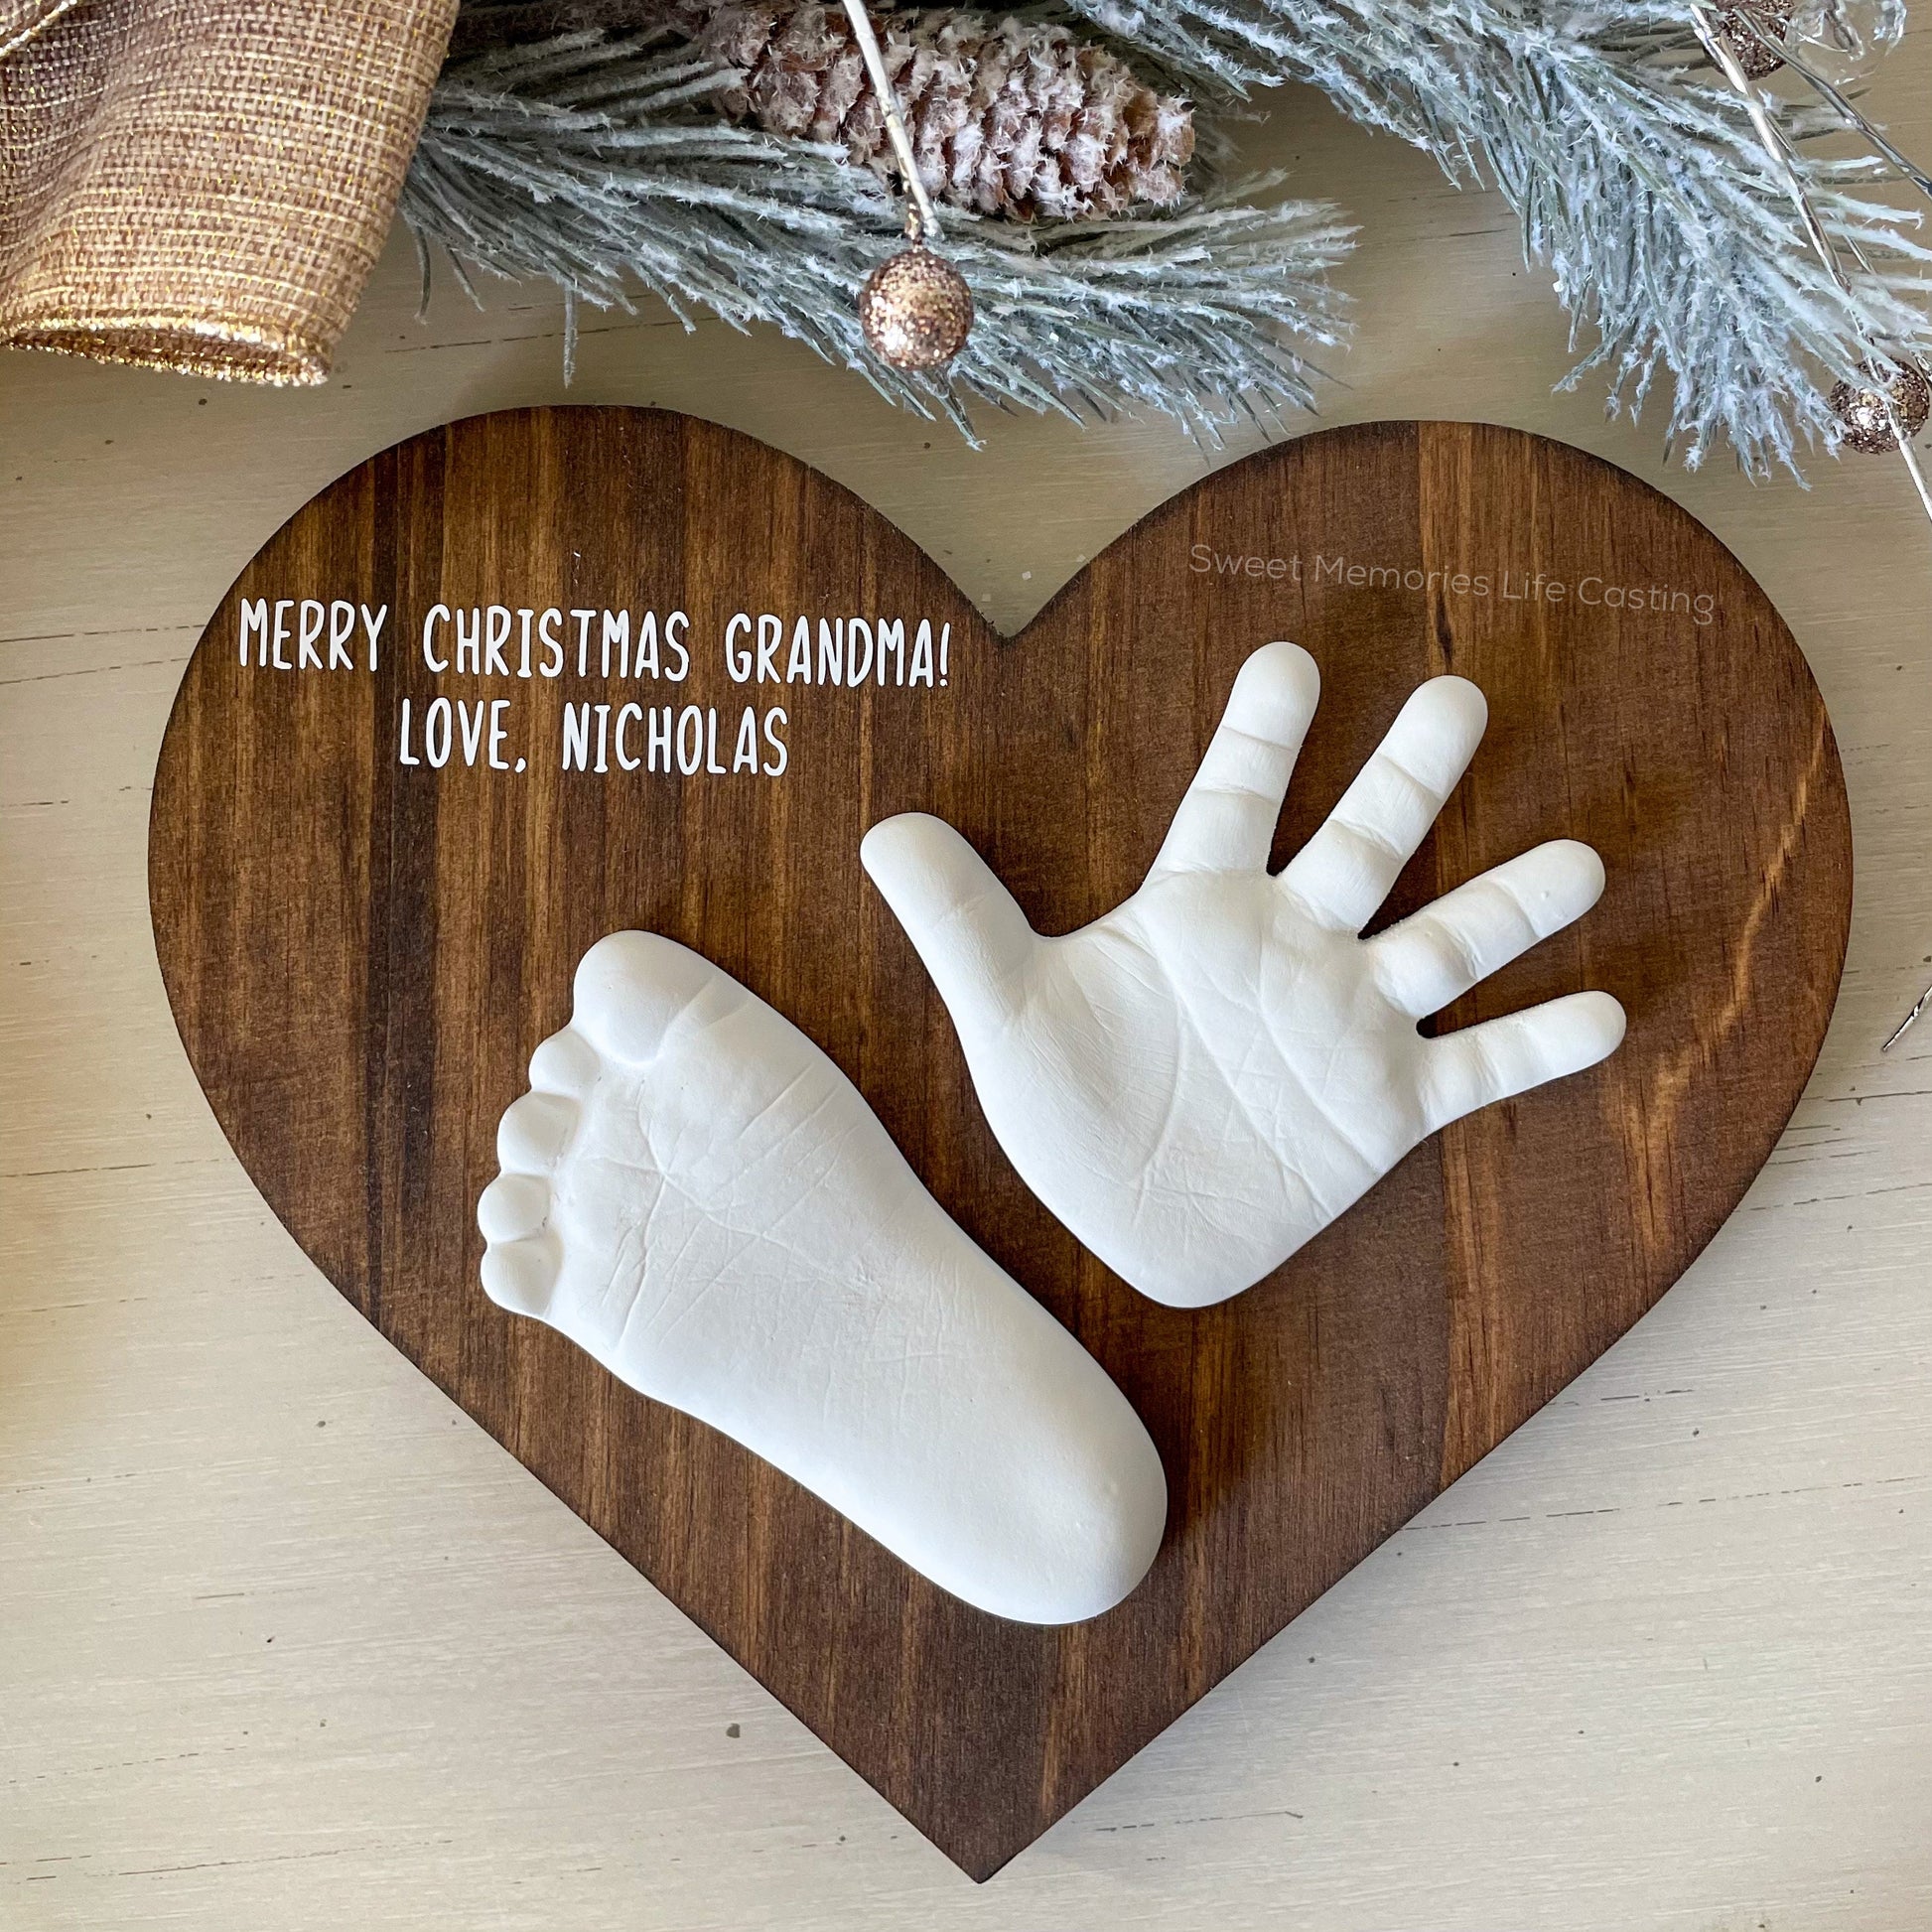 Merry Christmas Grandma heart plaque keepsake with baby's hand and foot castings